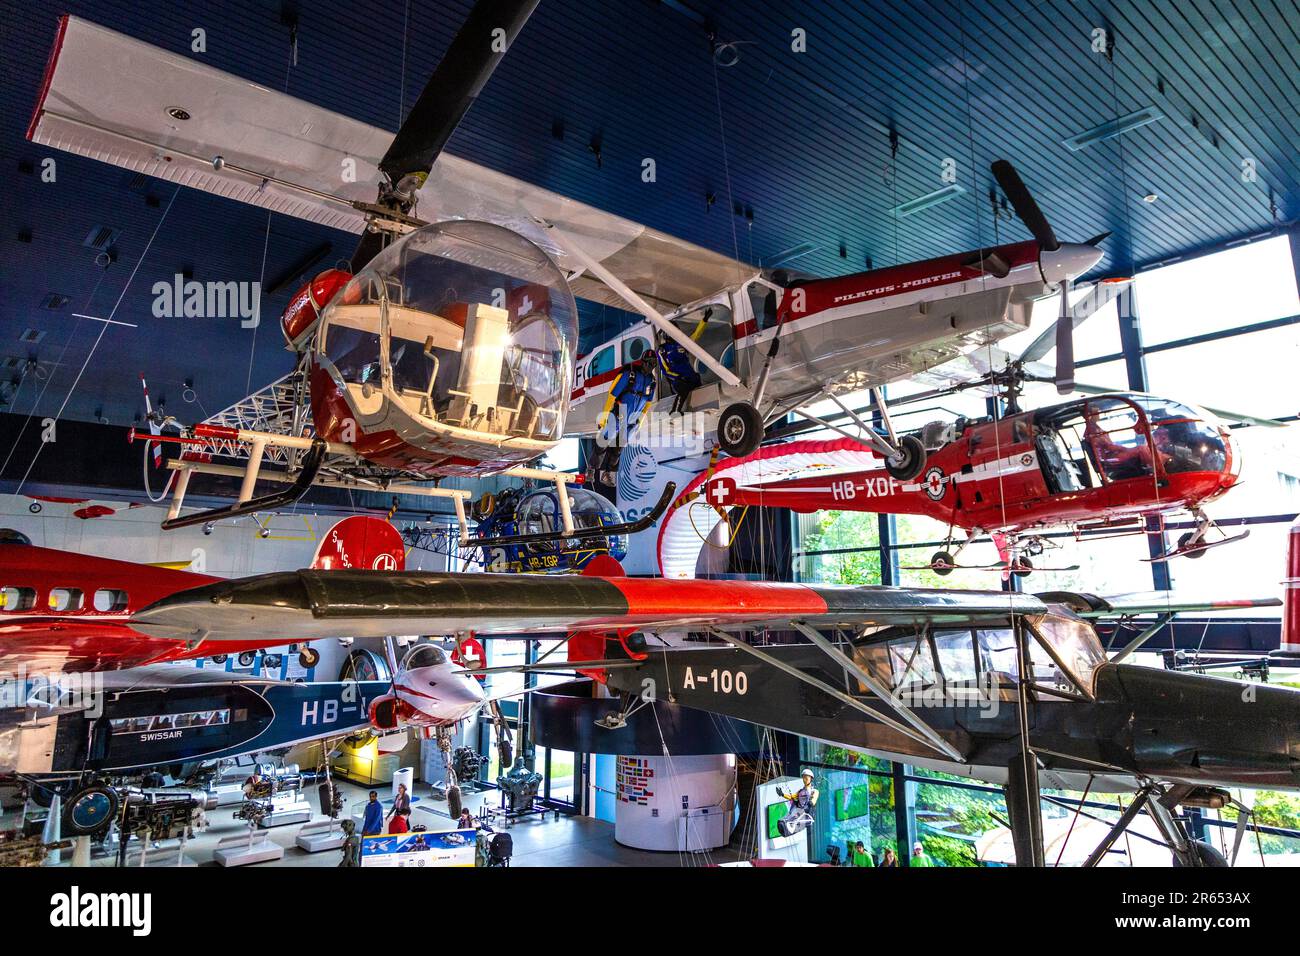 Display of airplanes and helicopters at the Swiss Museum of Transport, Lucerne, Switzerland Stock Photo